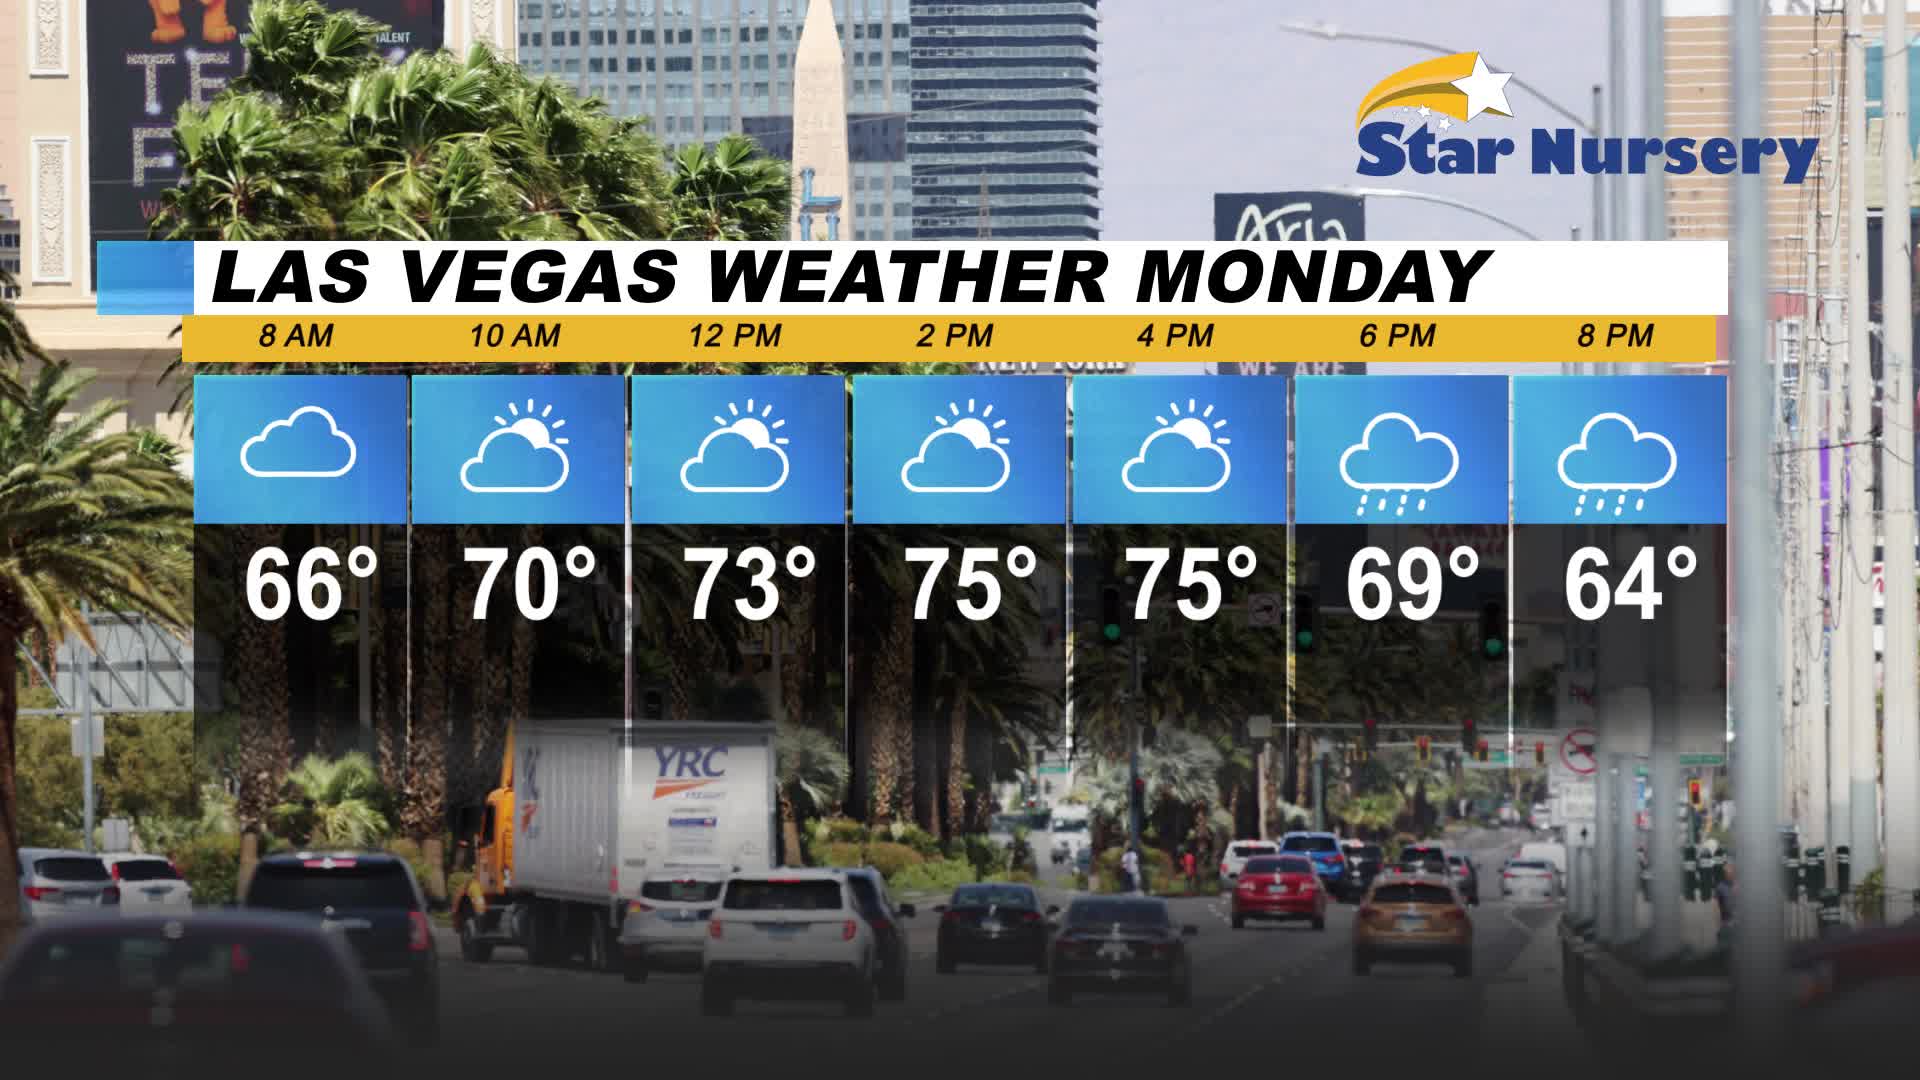 Windy with Chances of Rain for Monday and a High of 78 Degrees